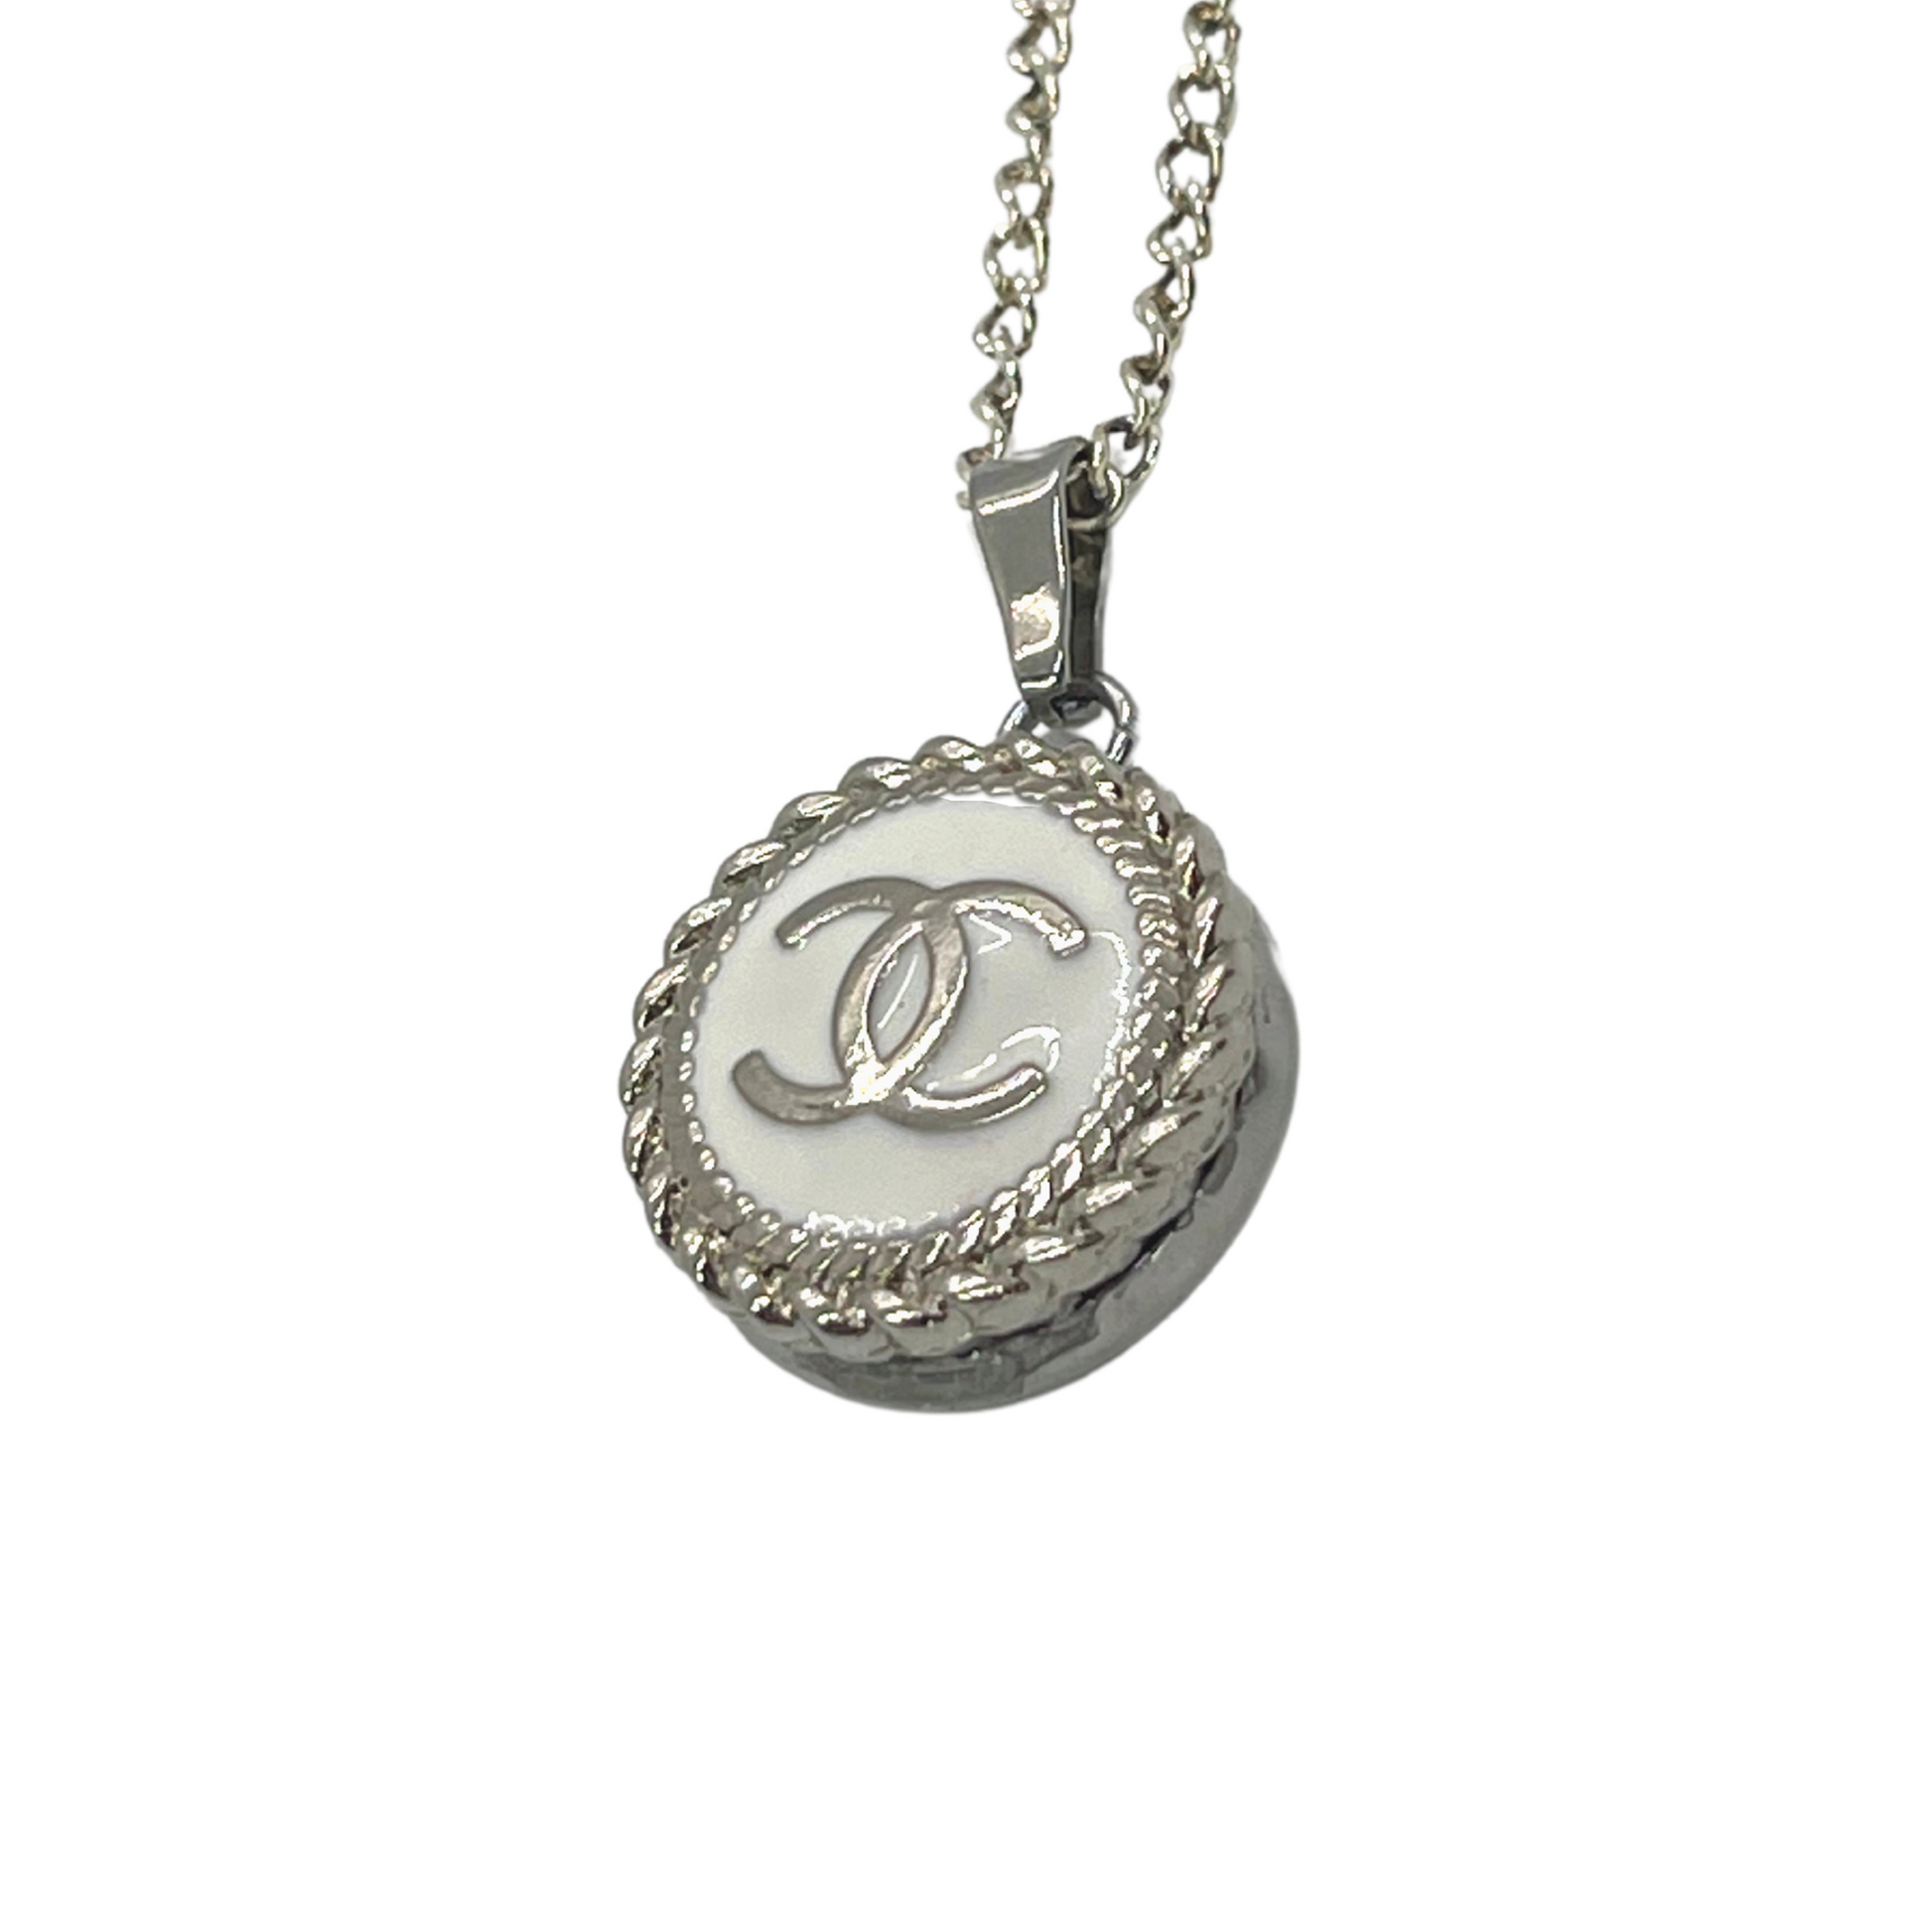 CHANEL CLASSIC. Reworked Gold CC Pendant Necklace – Westwood and Hyde